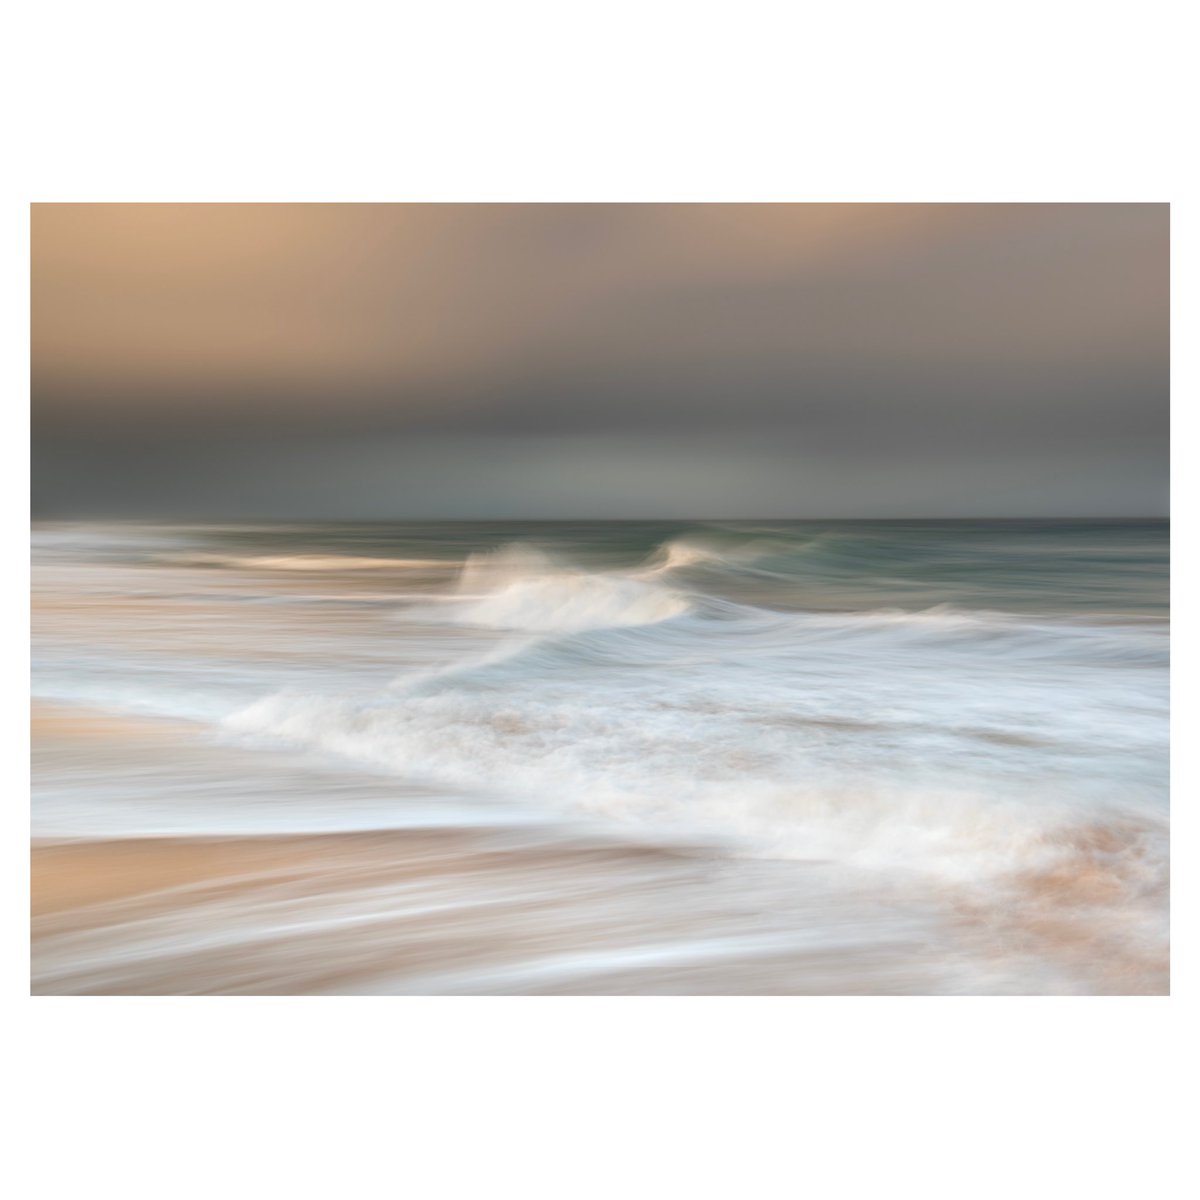 My favourite conditions up in #Aberdeenshire last week, which sadly now feels like a distant memory!! But at least it’s the #weekend

#seascapephotography #icmphotography #scotland